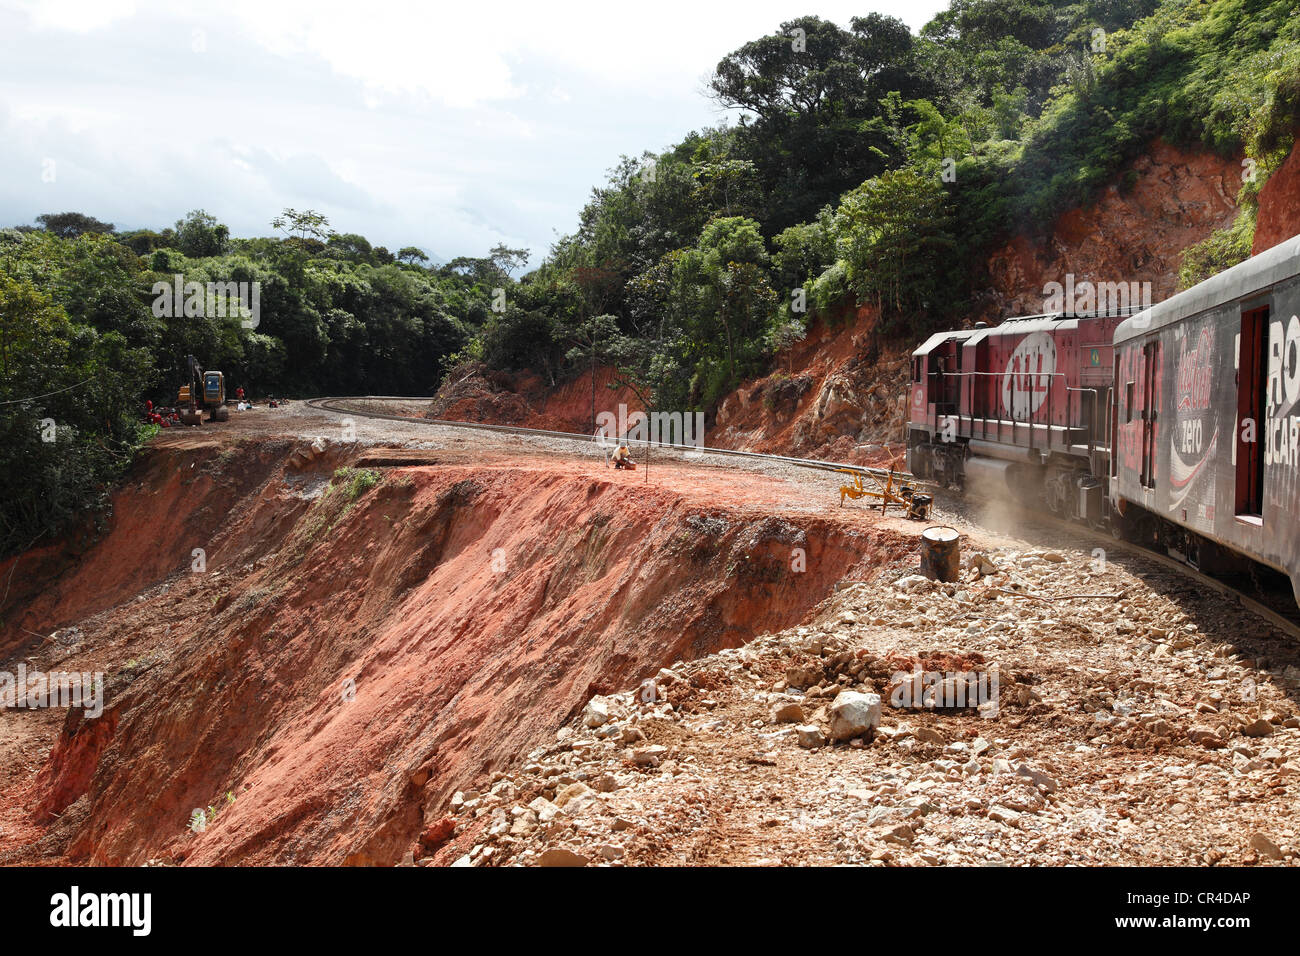 Train passing a landslide that devastated large tracts of land after heavy rains in the spring of 2011, historic railway line Stock Photo